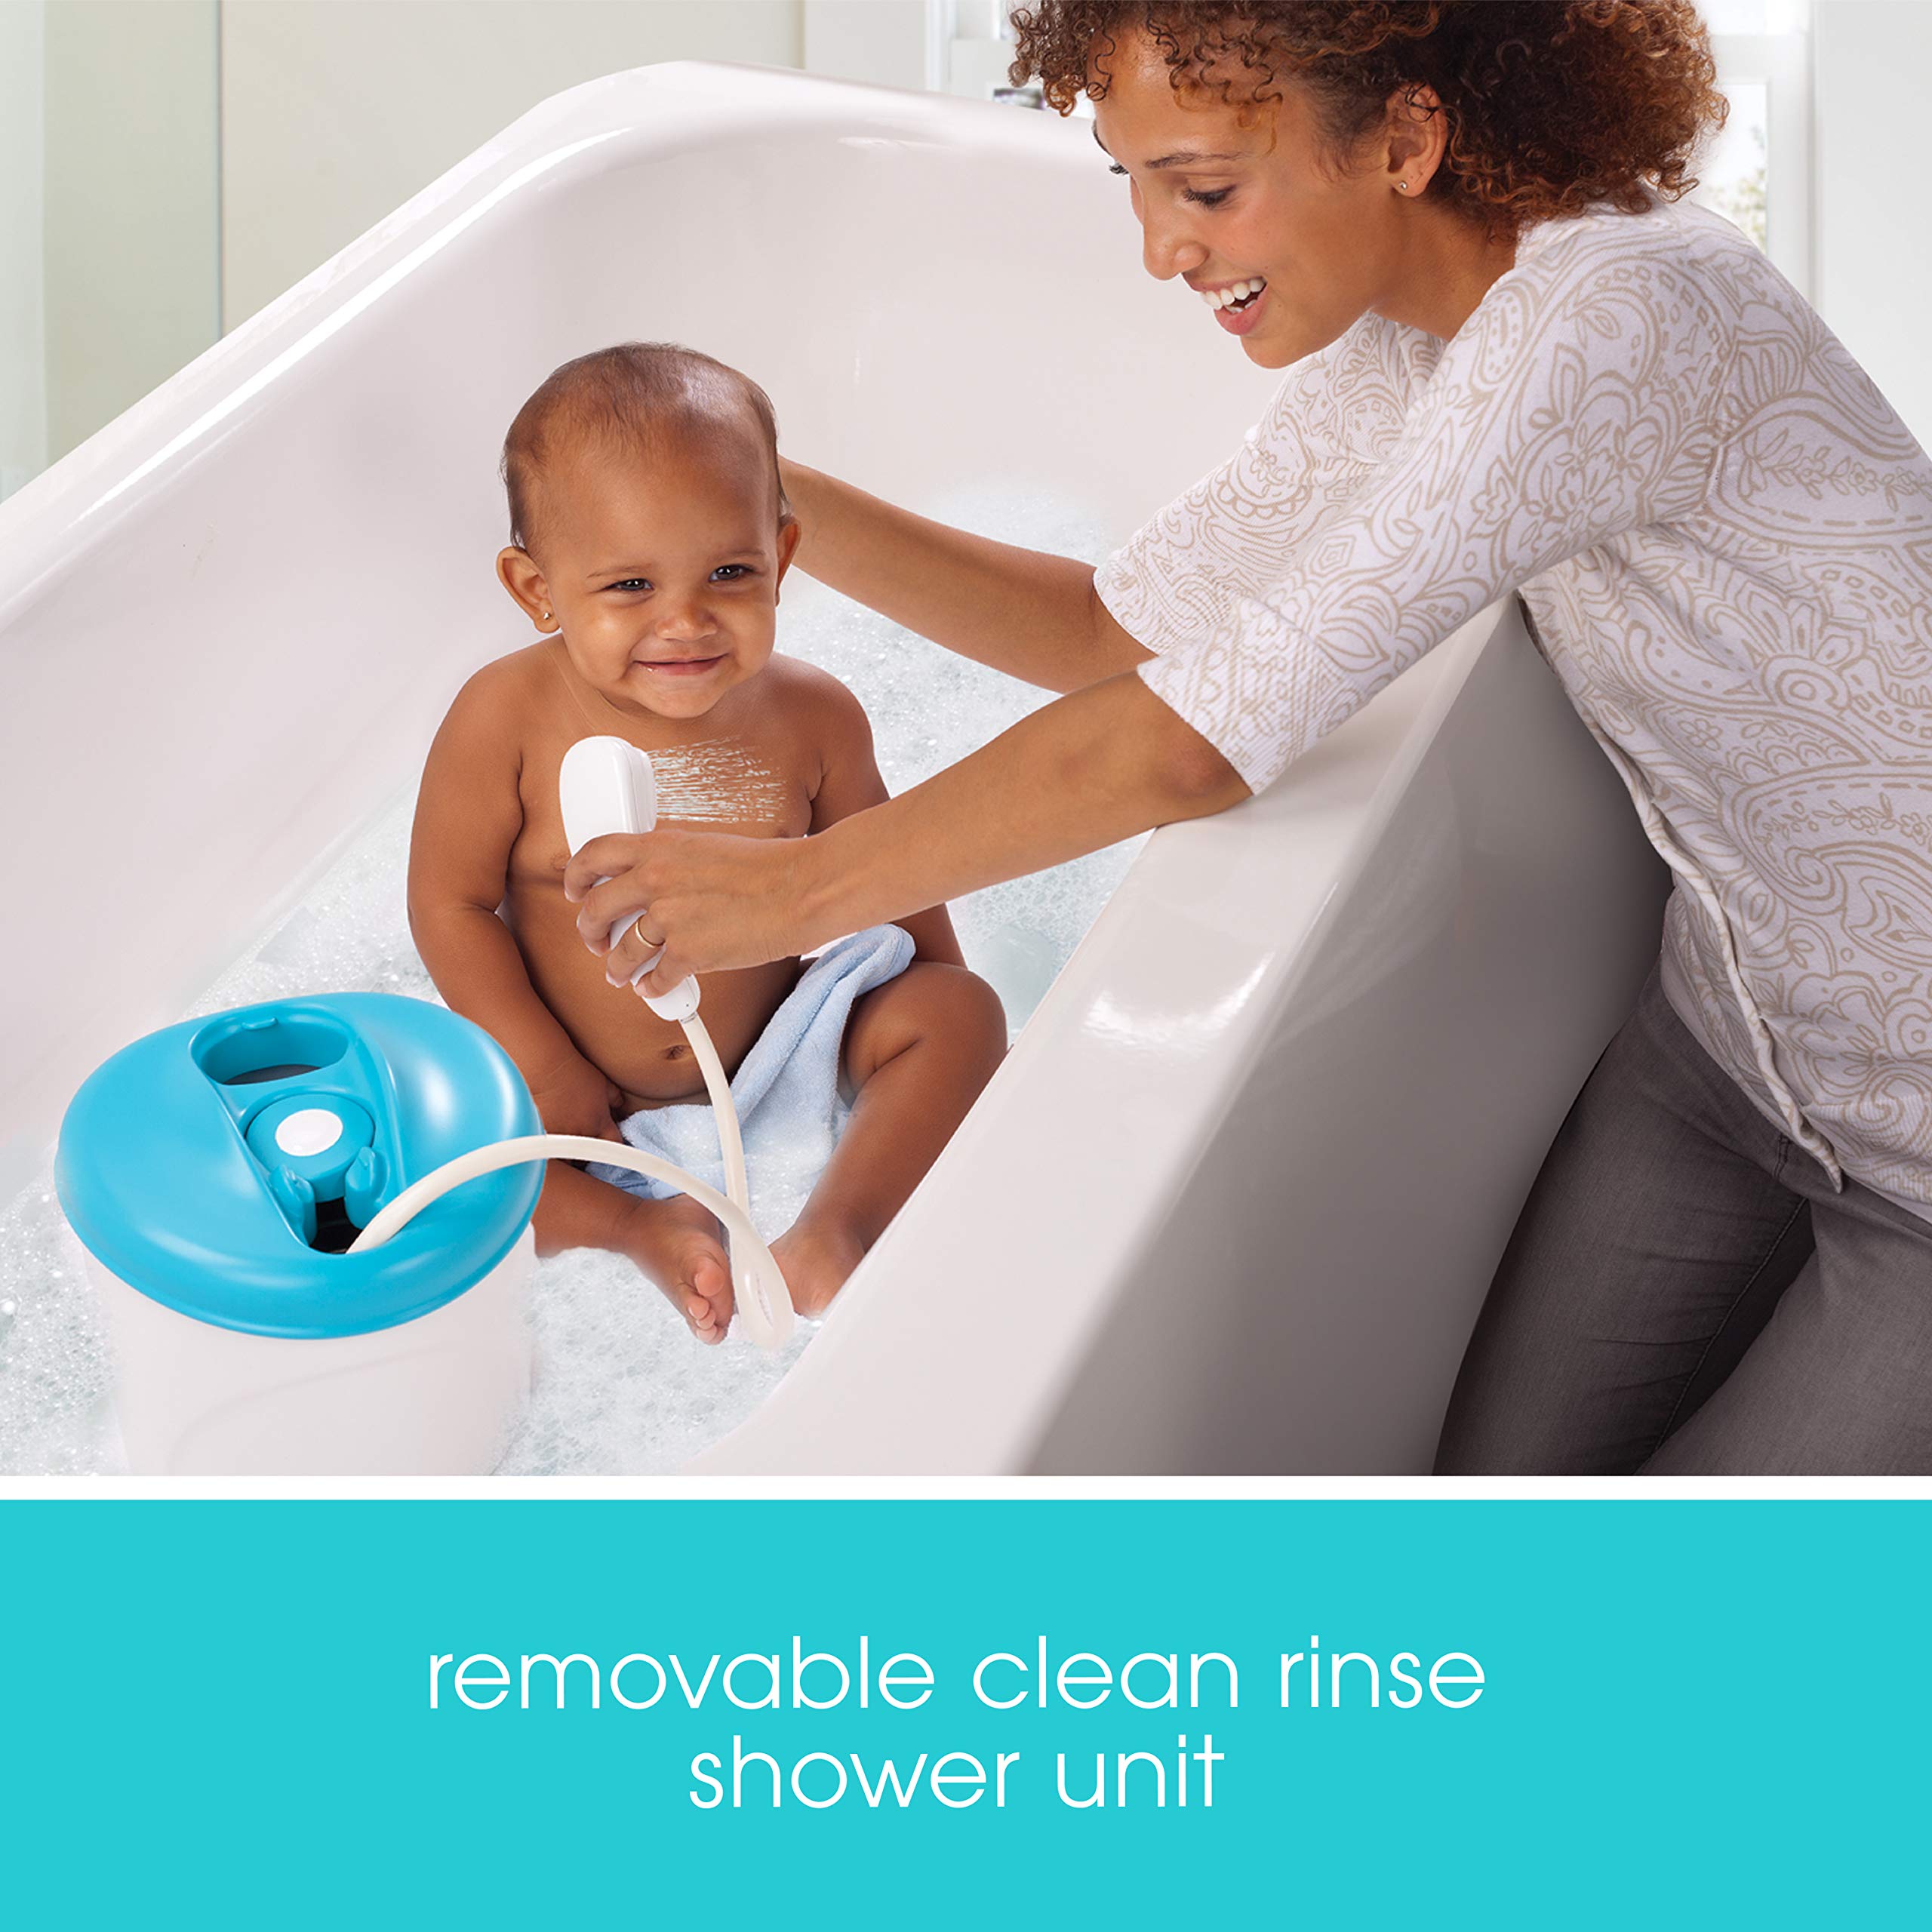 Summer Newborn to Toddler Bath Center and Shower (Neutral) - Bathtub Includes Four Stages that Grow with Your Child